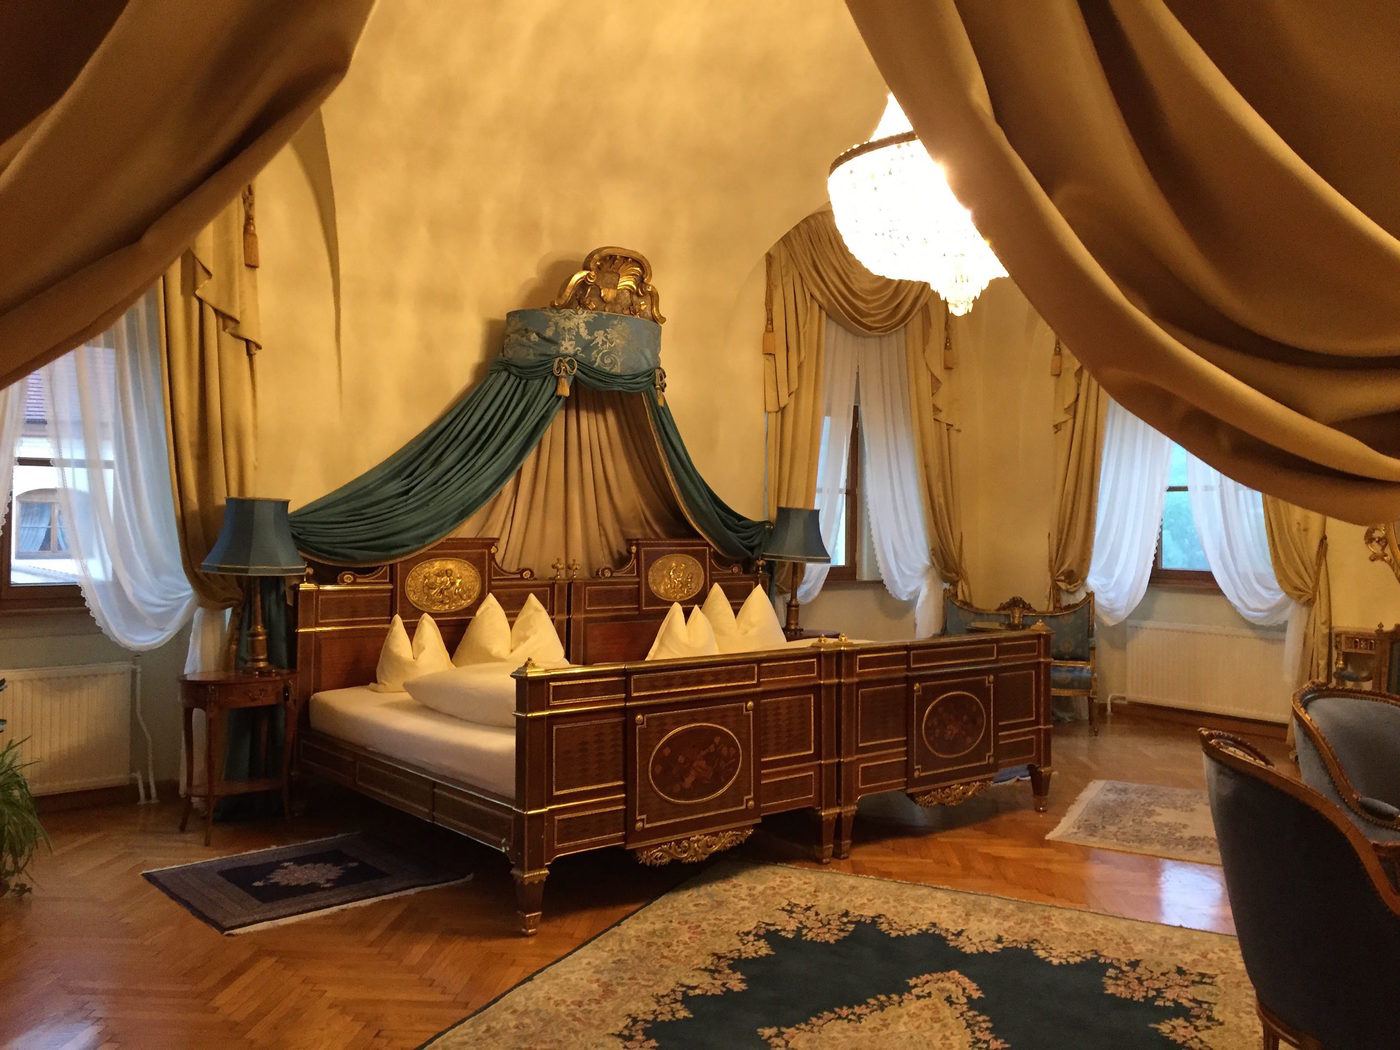 Enormous bedroom with high ceilings and a giant, double-double bed